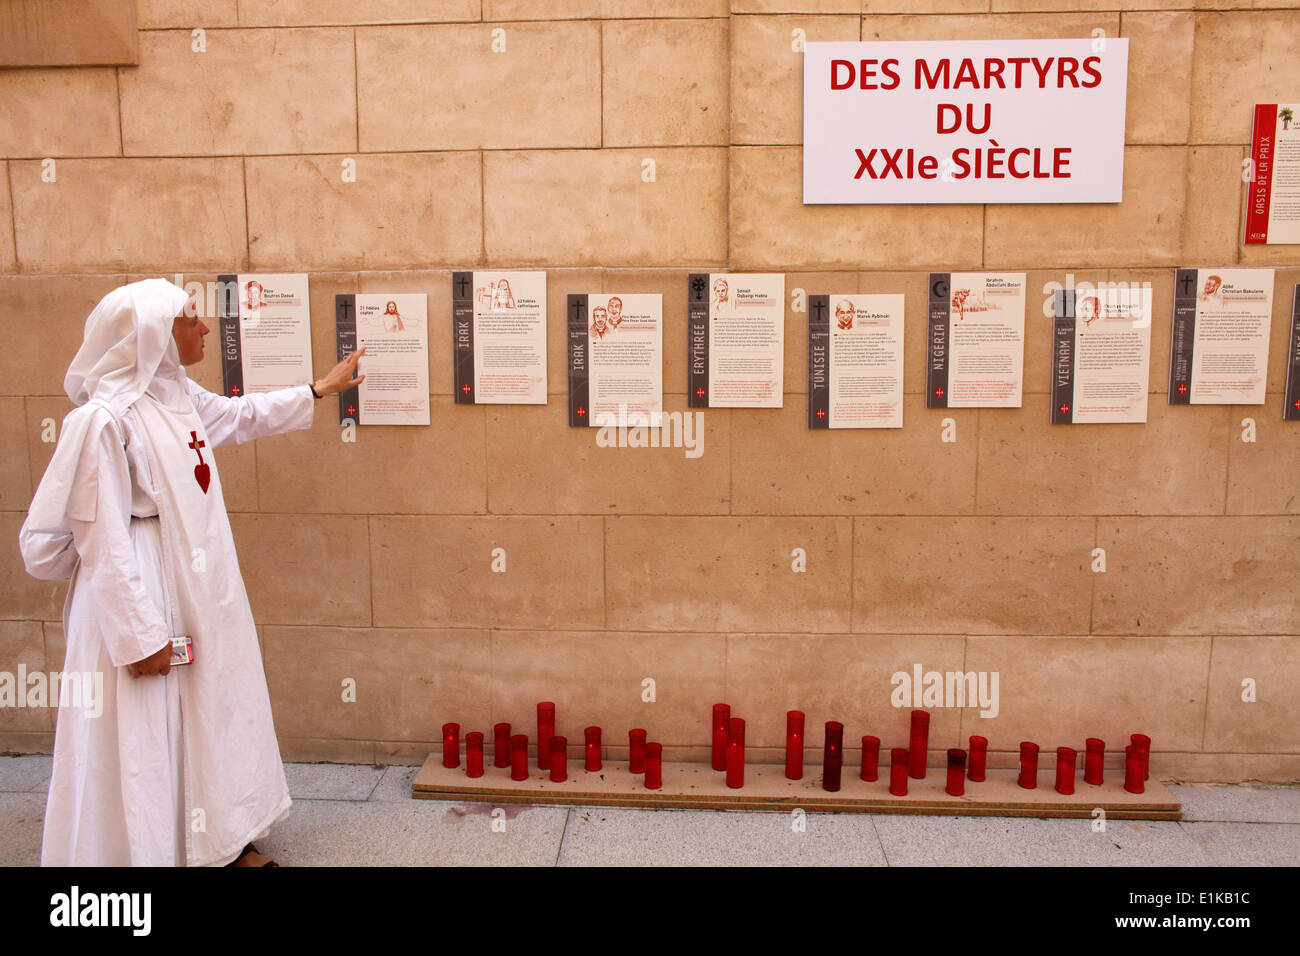 Tribute to the christian martyrs of the 21st century Stock Photo